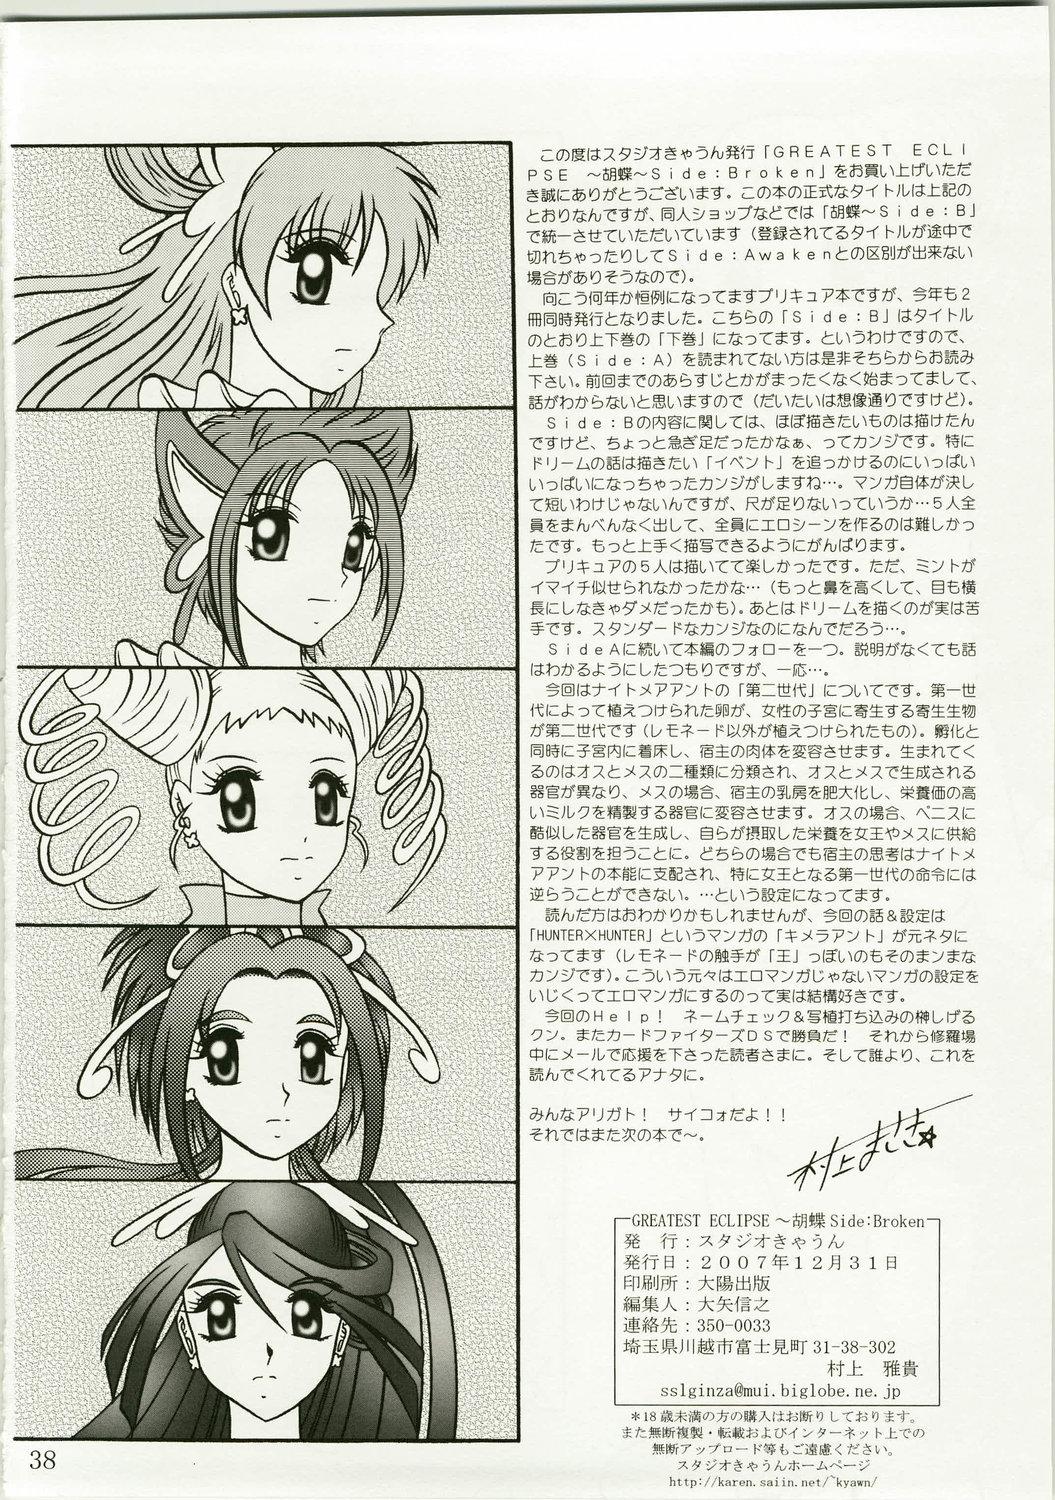 Movies GREATEST ECLIPSE Kochou Side:A - Pretty cure Yes precure 5 Dance - Page 38